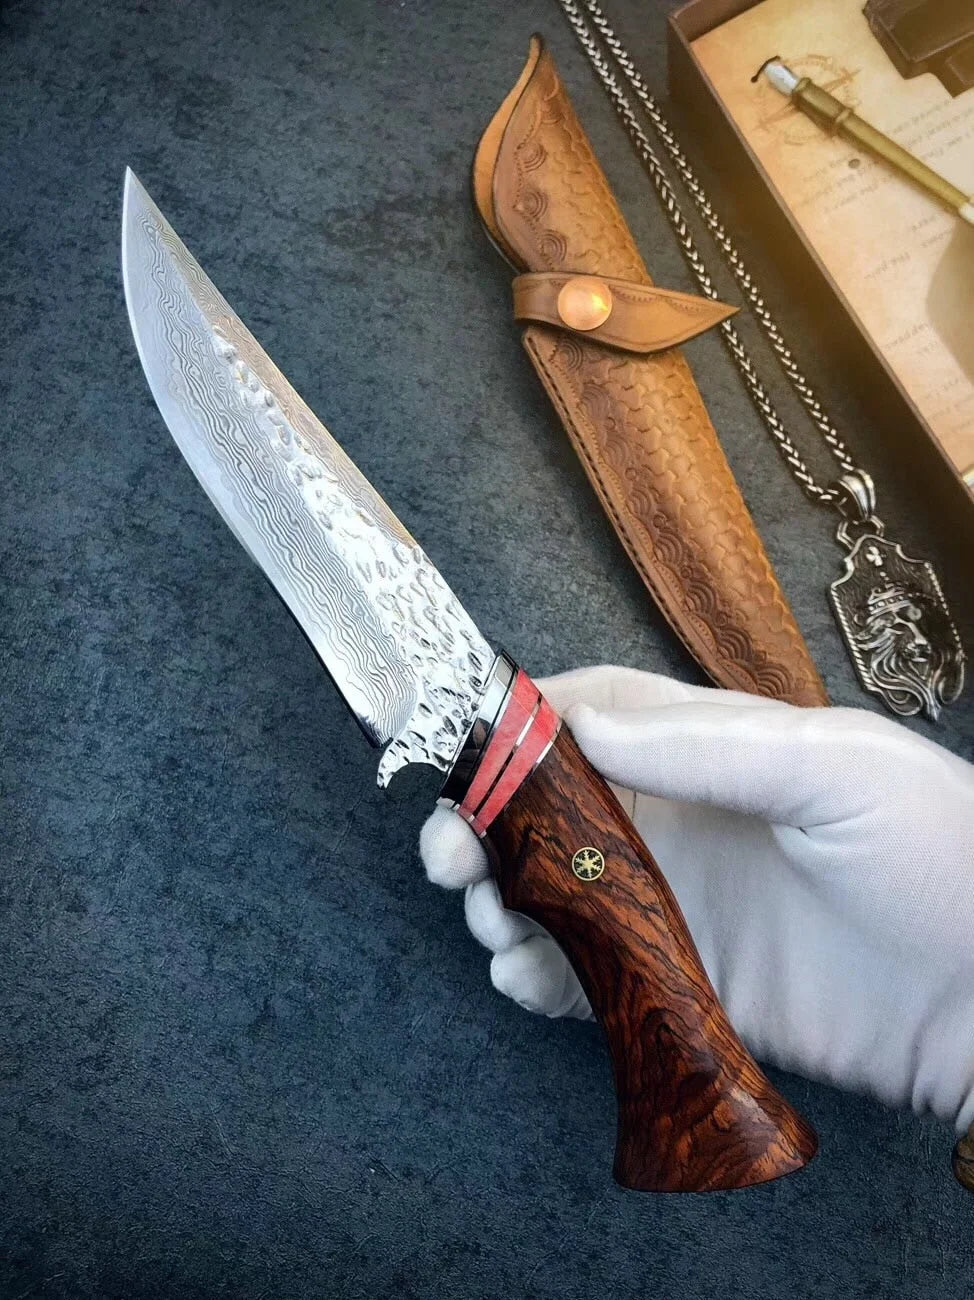 Damascus steel exterior knife with redwood handle